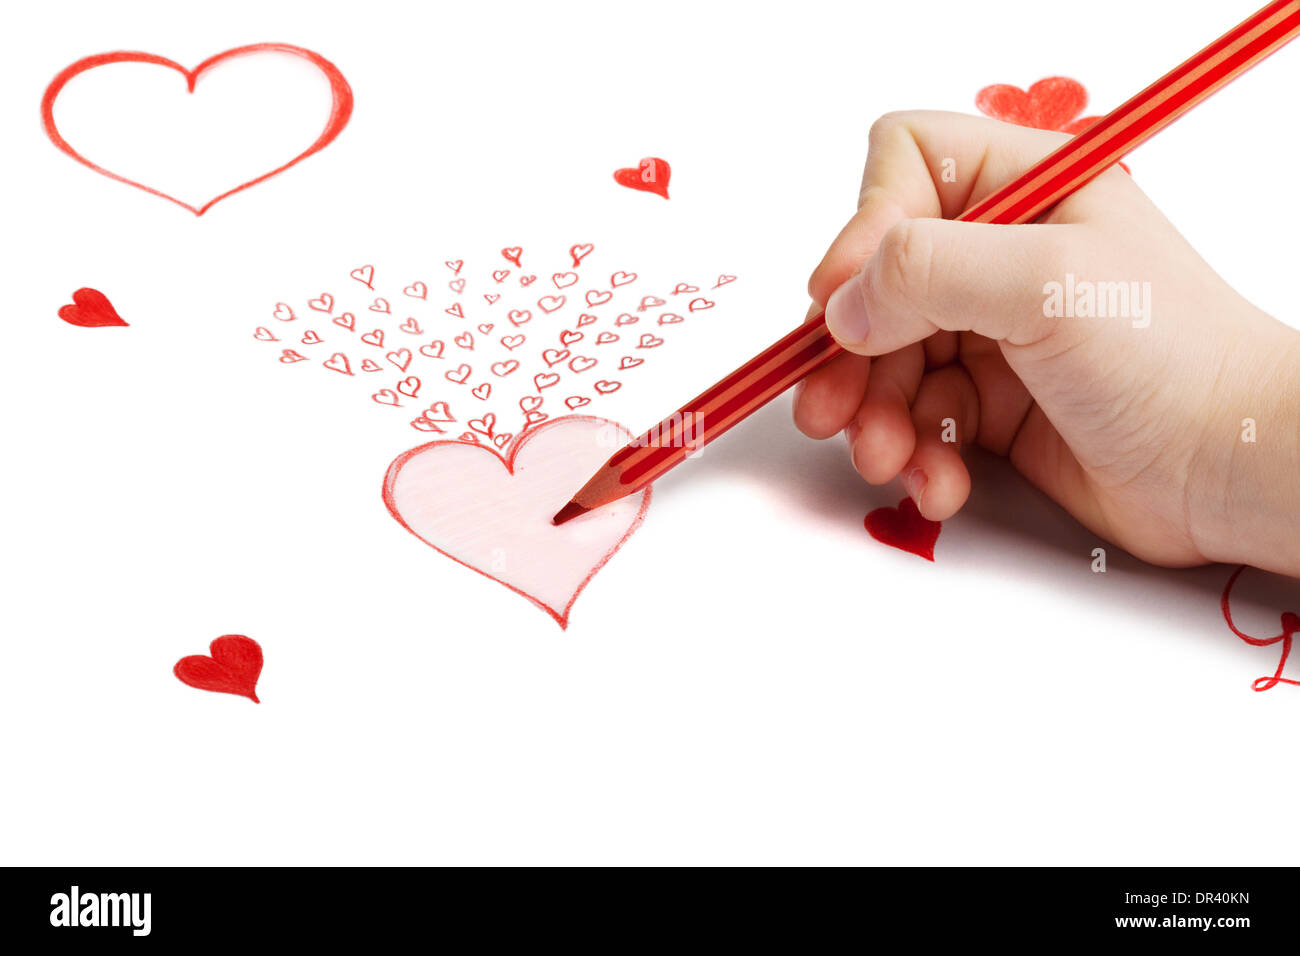 Child's hand drawing Saint Valentine card with hearts Stock Photo